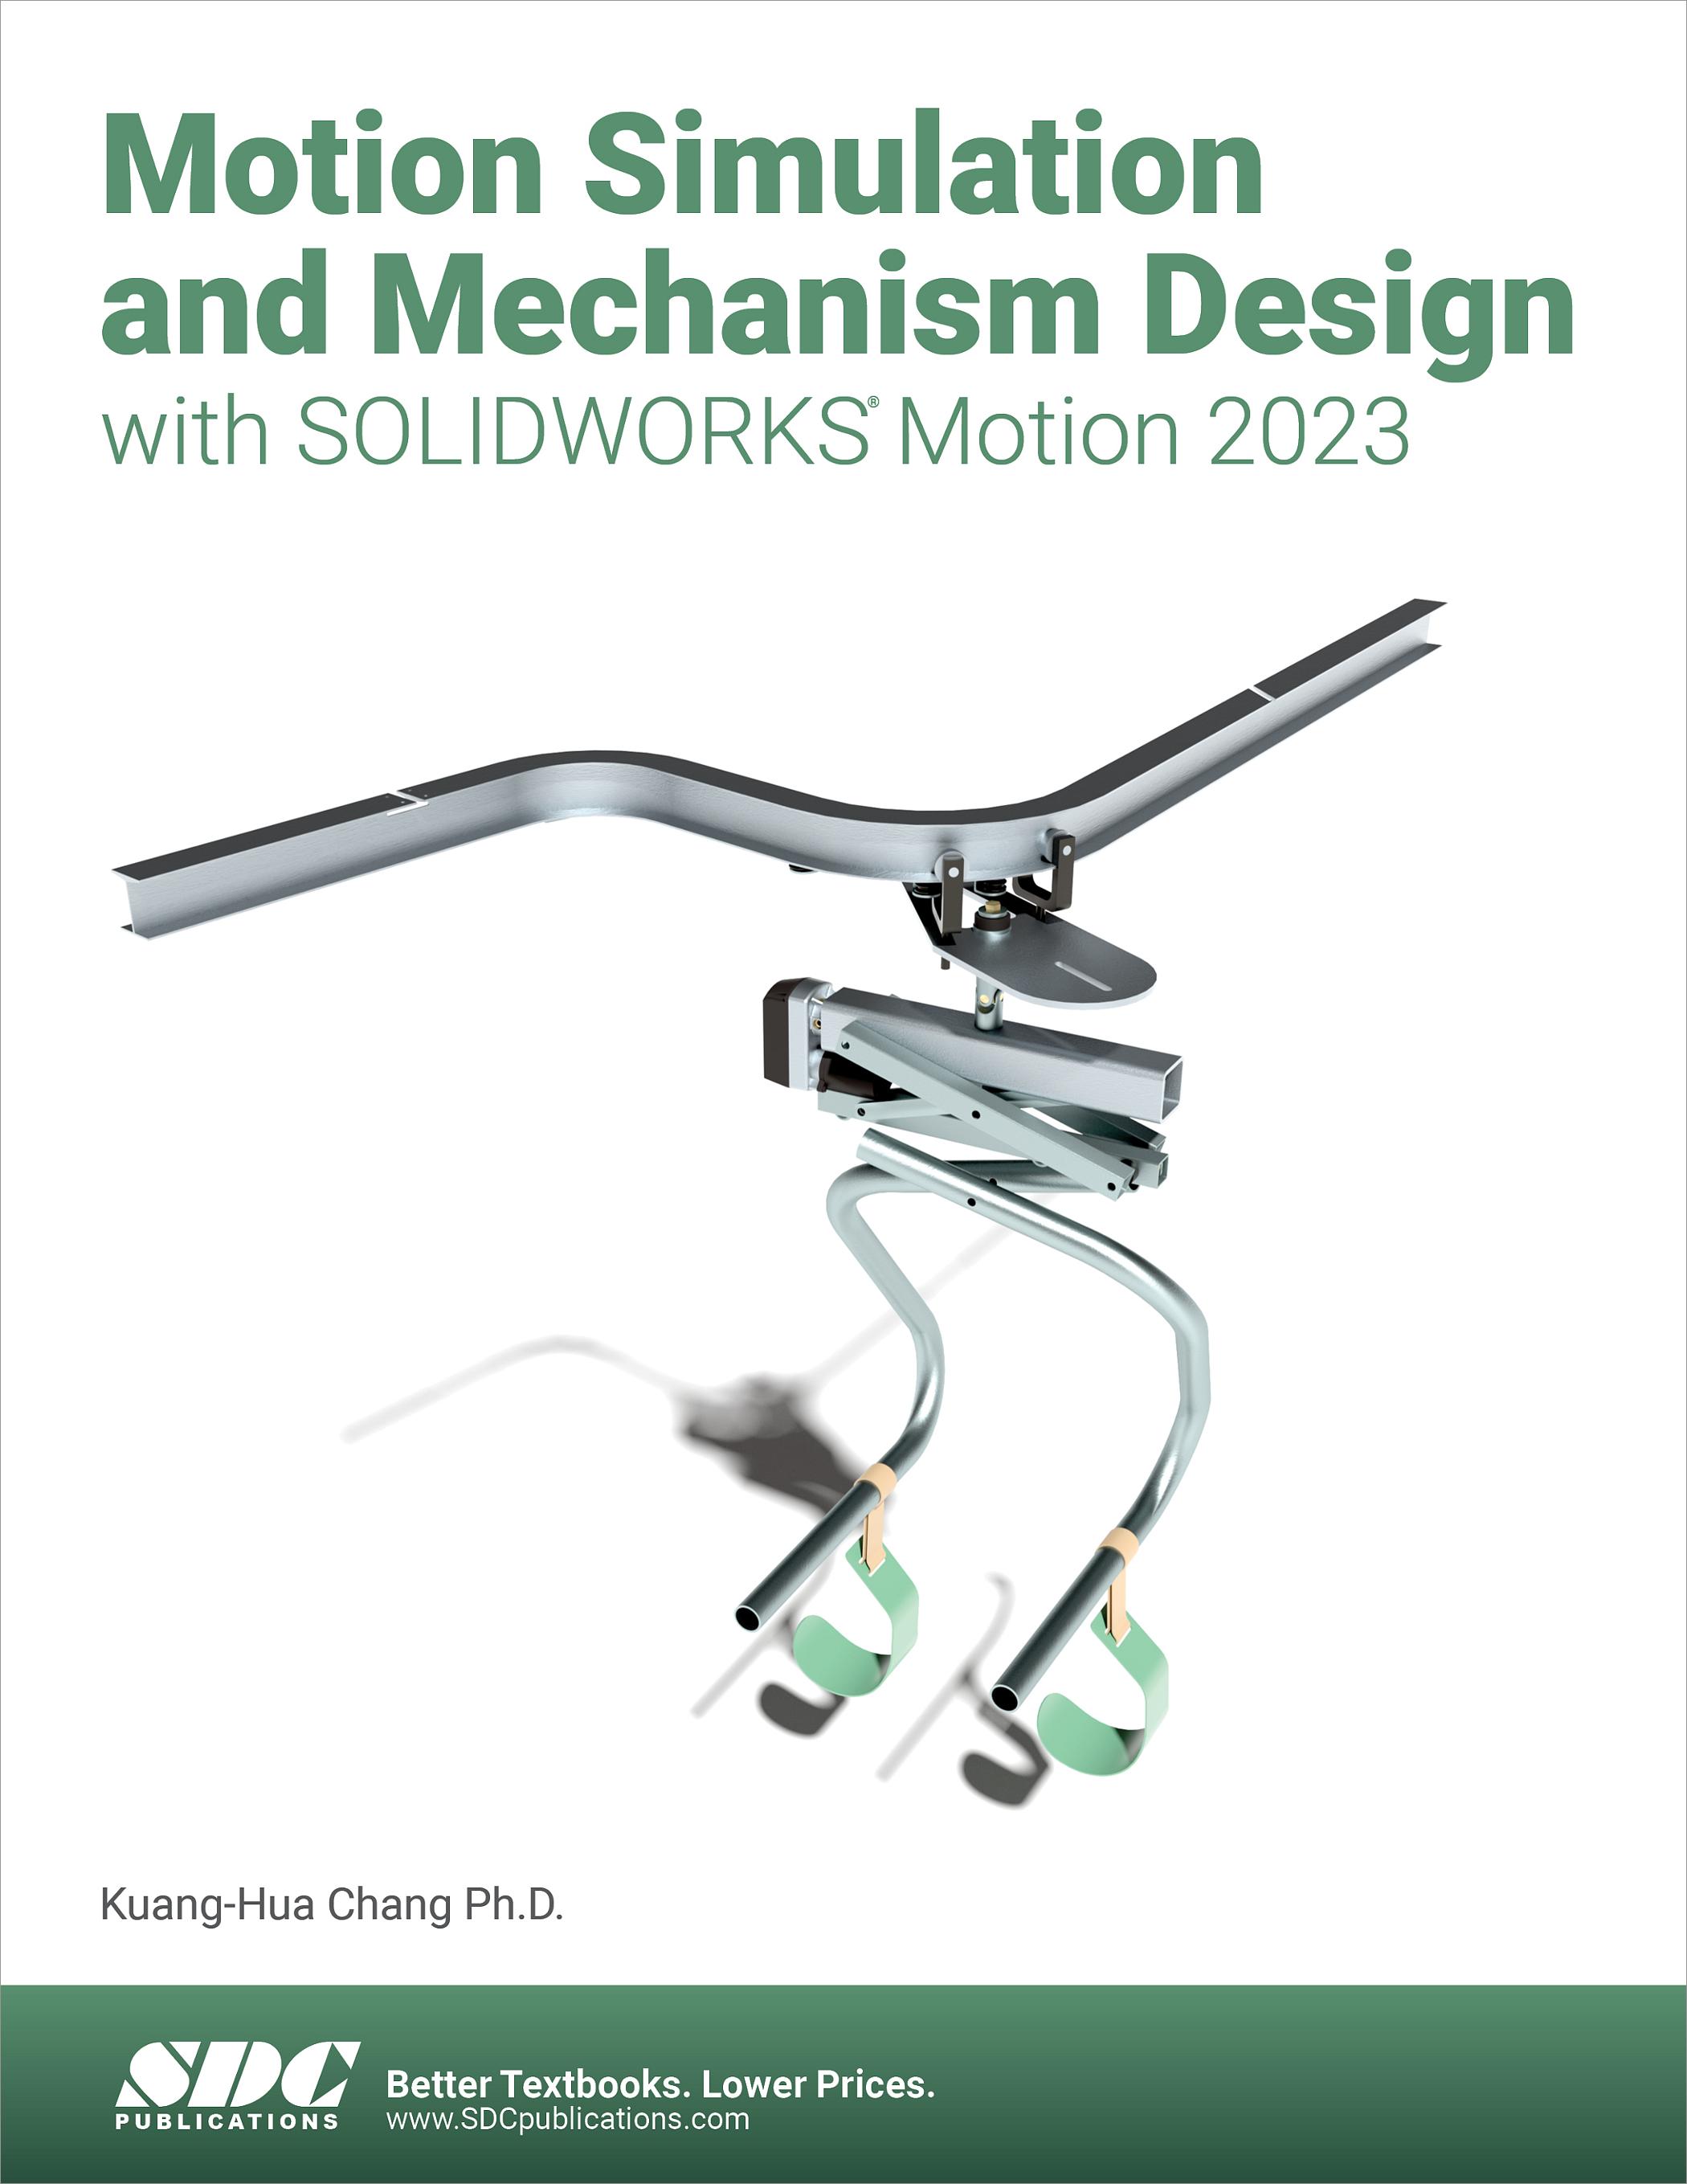 motion-simulation-and-mechanism-design-with-solidworks-motion-2023-book-9781630575731-sdc